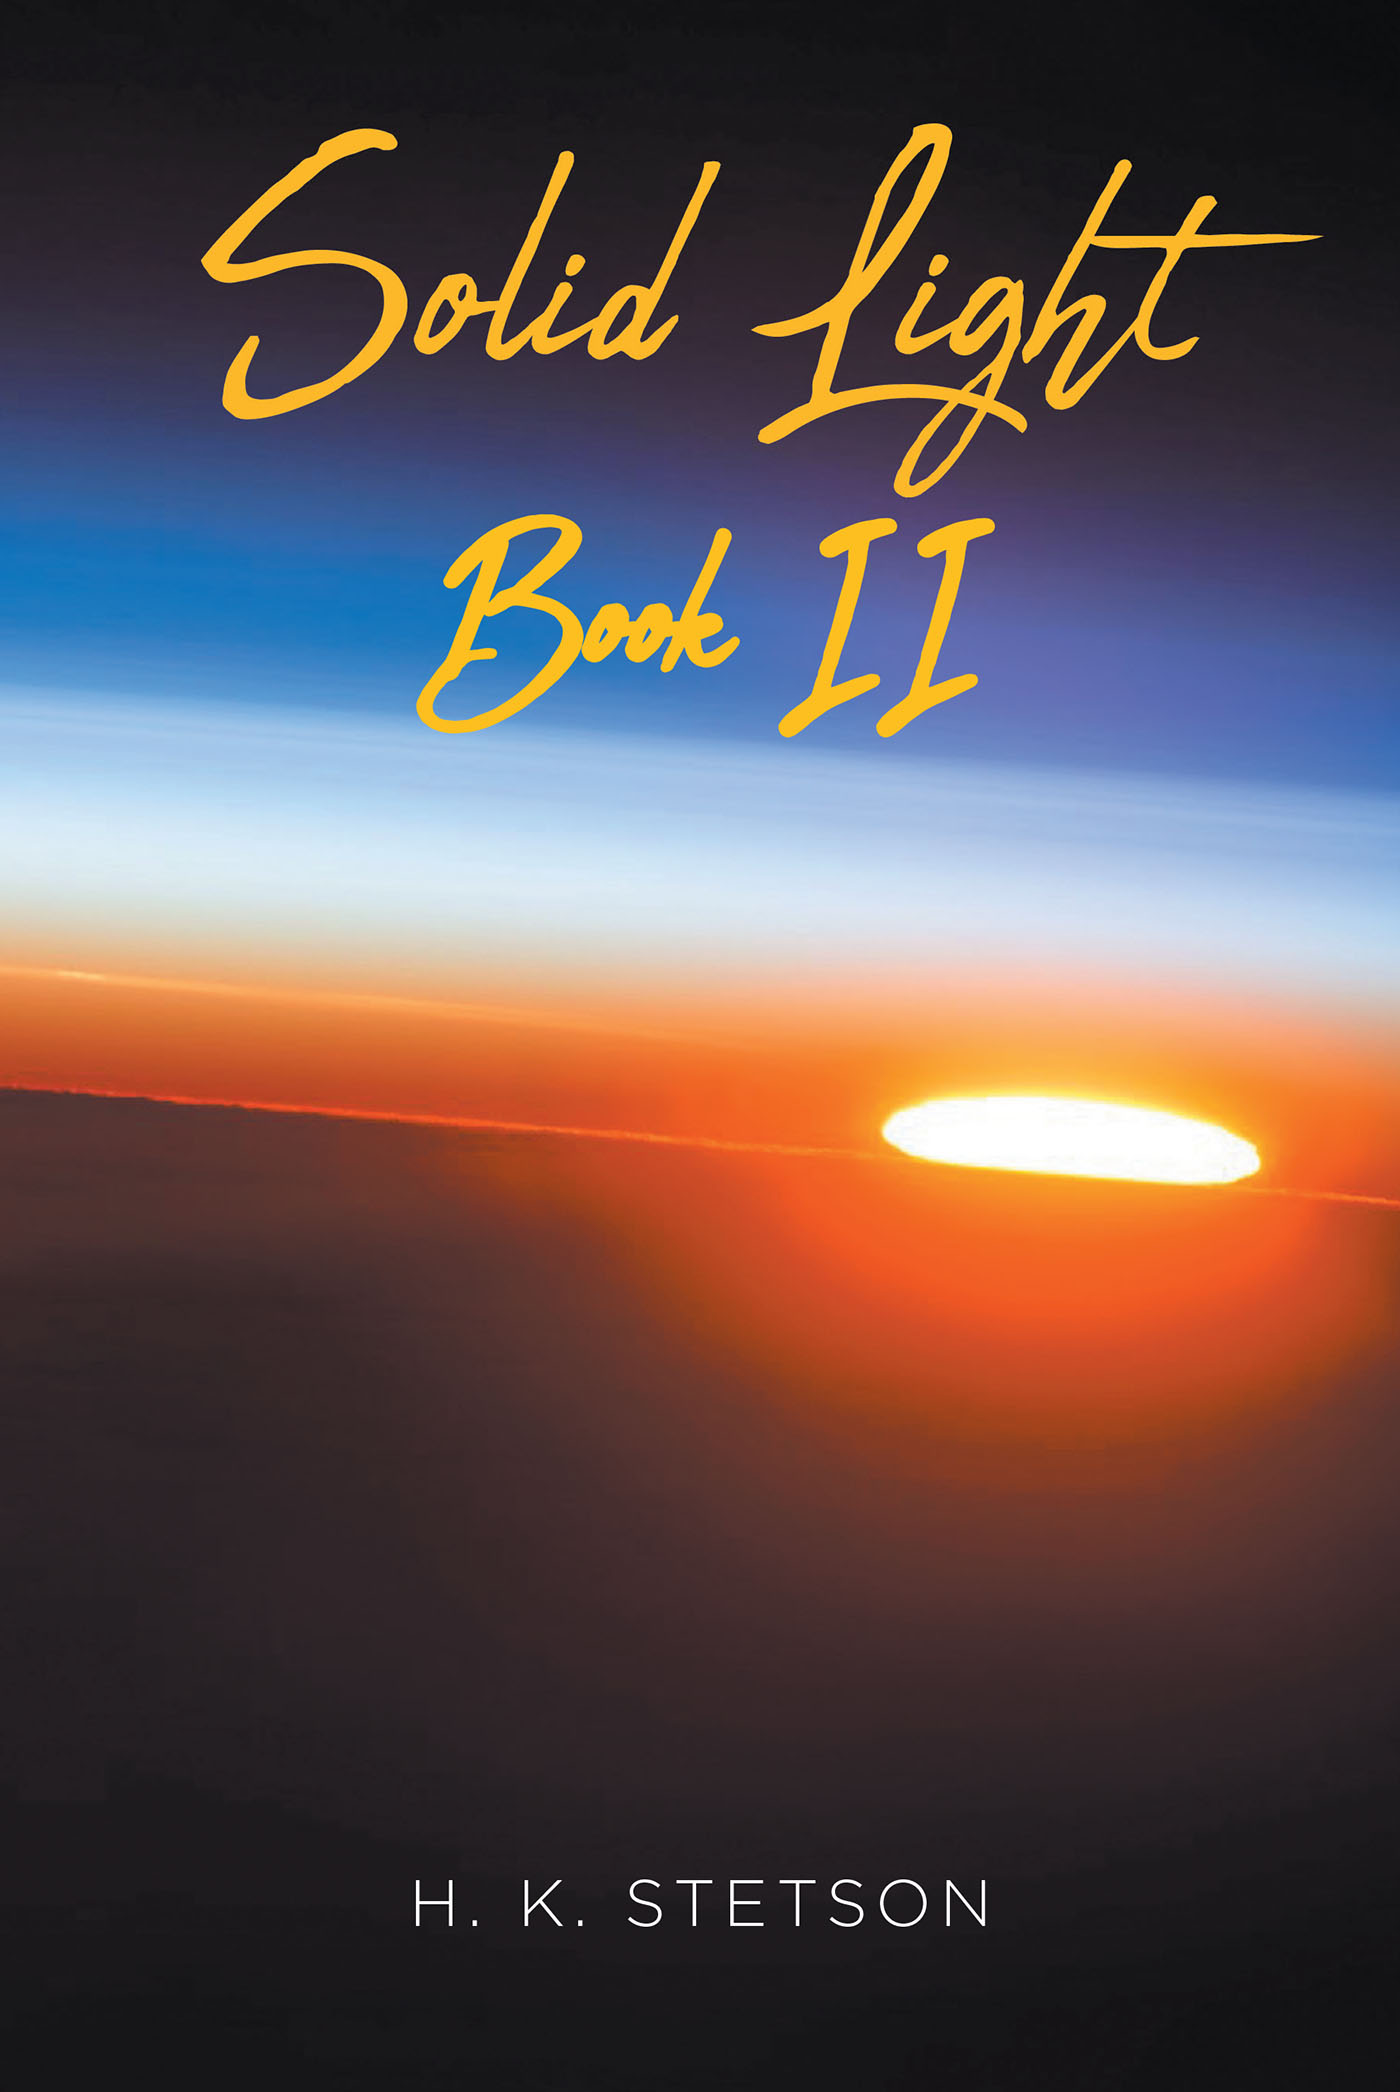 Author H. K. Stetson’s New Book, “Solid Light Book II,” Follows the Ultimate Battle Between Good and Evil for Control Over the Universe